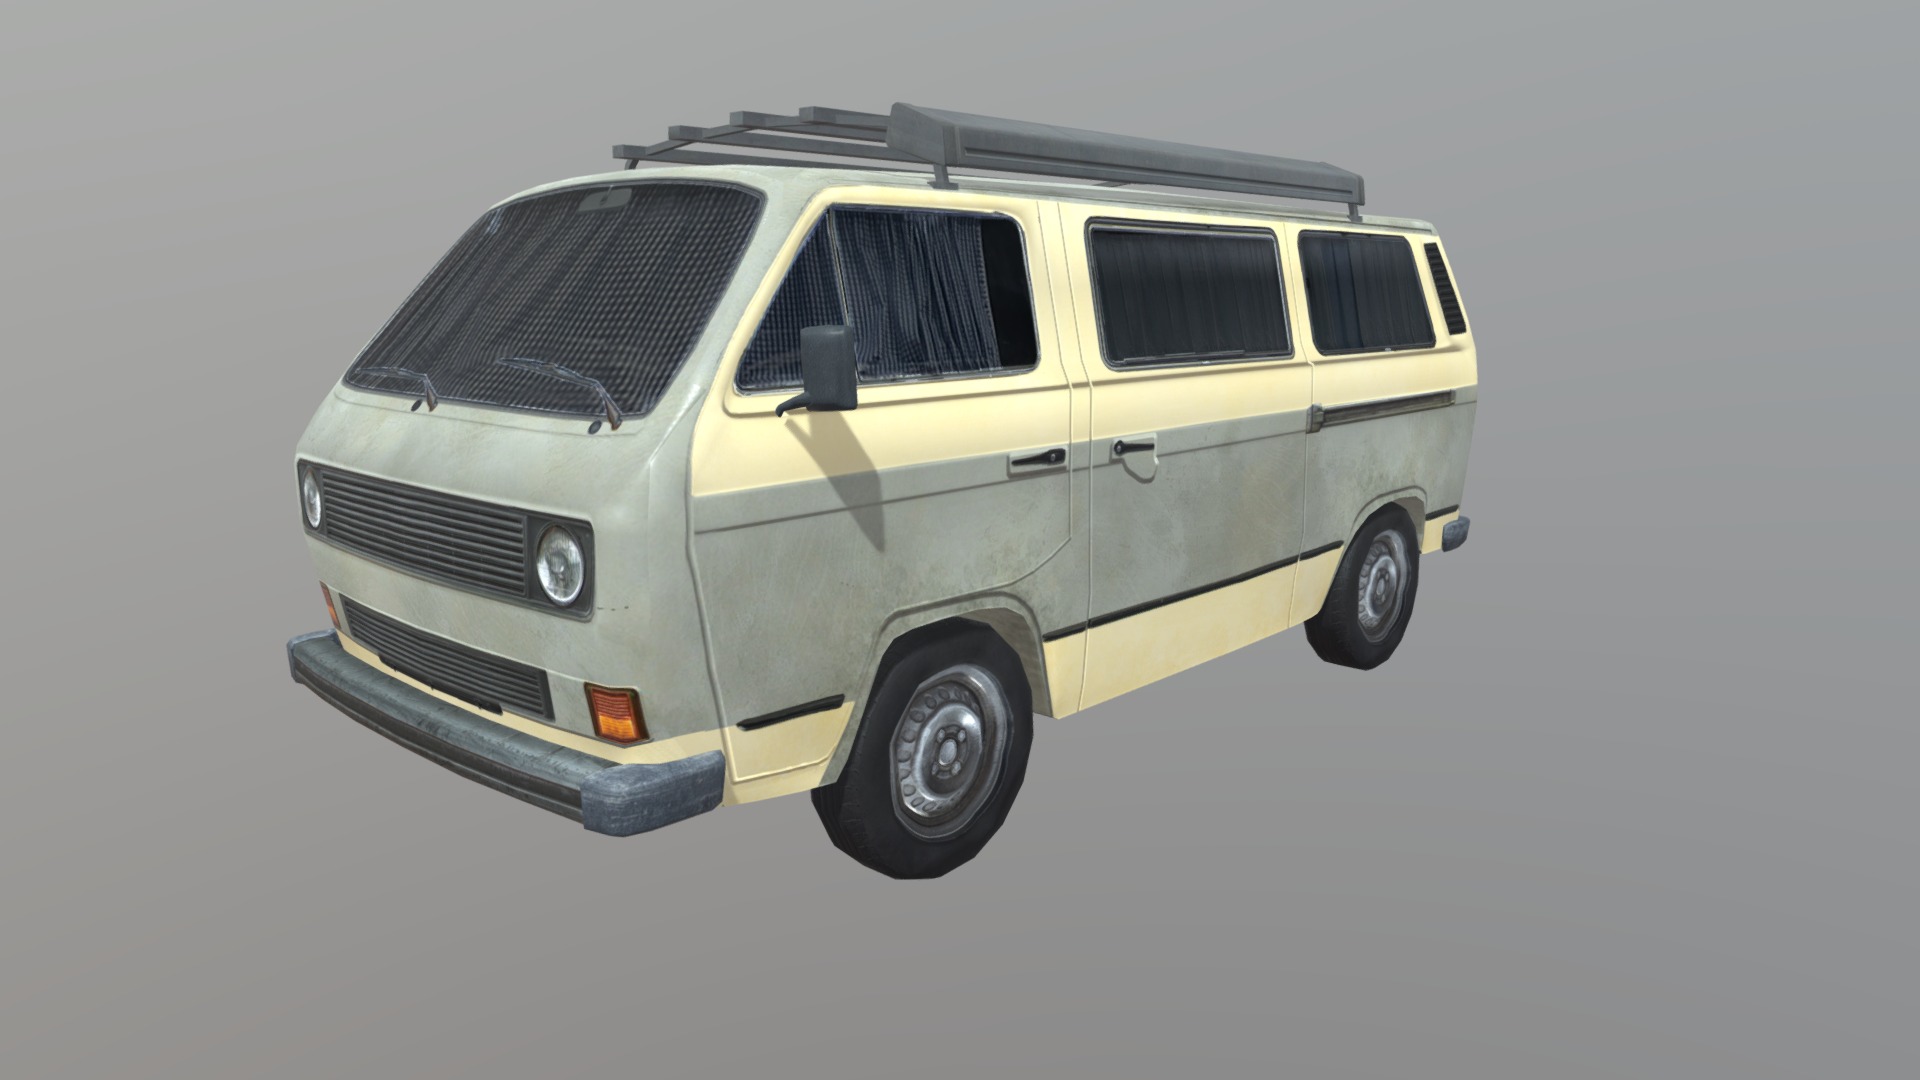 3D model VW T3 Caravan lowpoly model - This is a 3D model of the VW T3 Caravan lowpoly model. The 3D model is about a small yellow van.